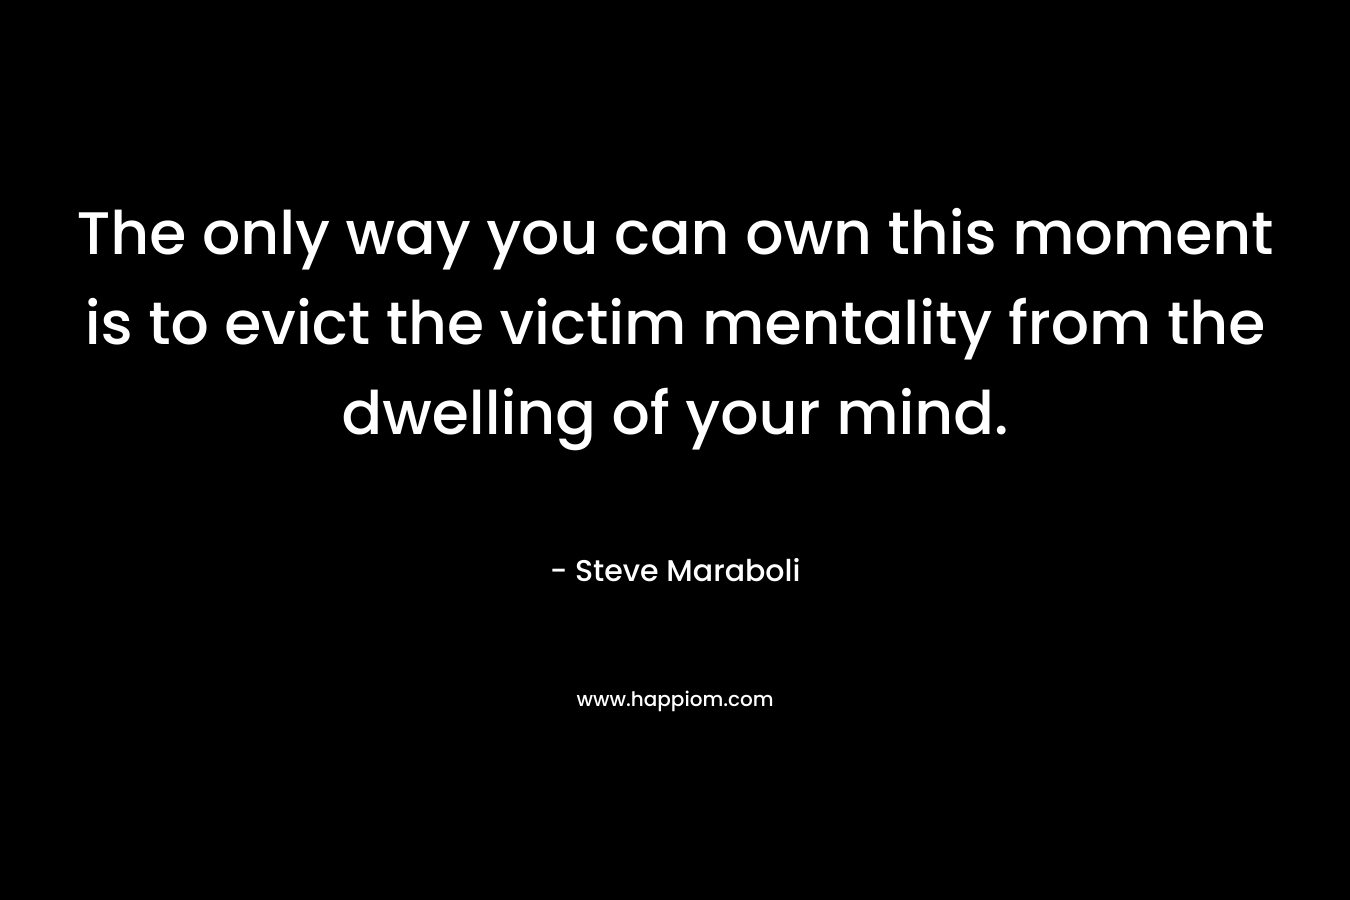 The only way you can own this moment is to evict the victim mentality from the dwelling of your mind.